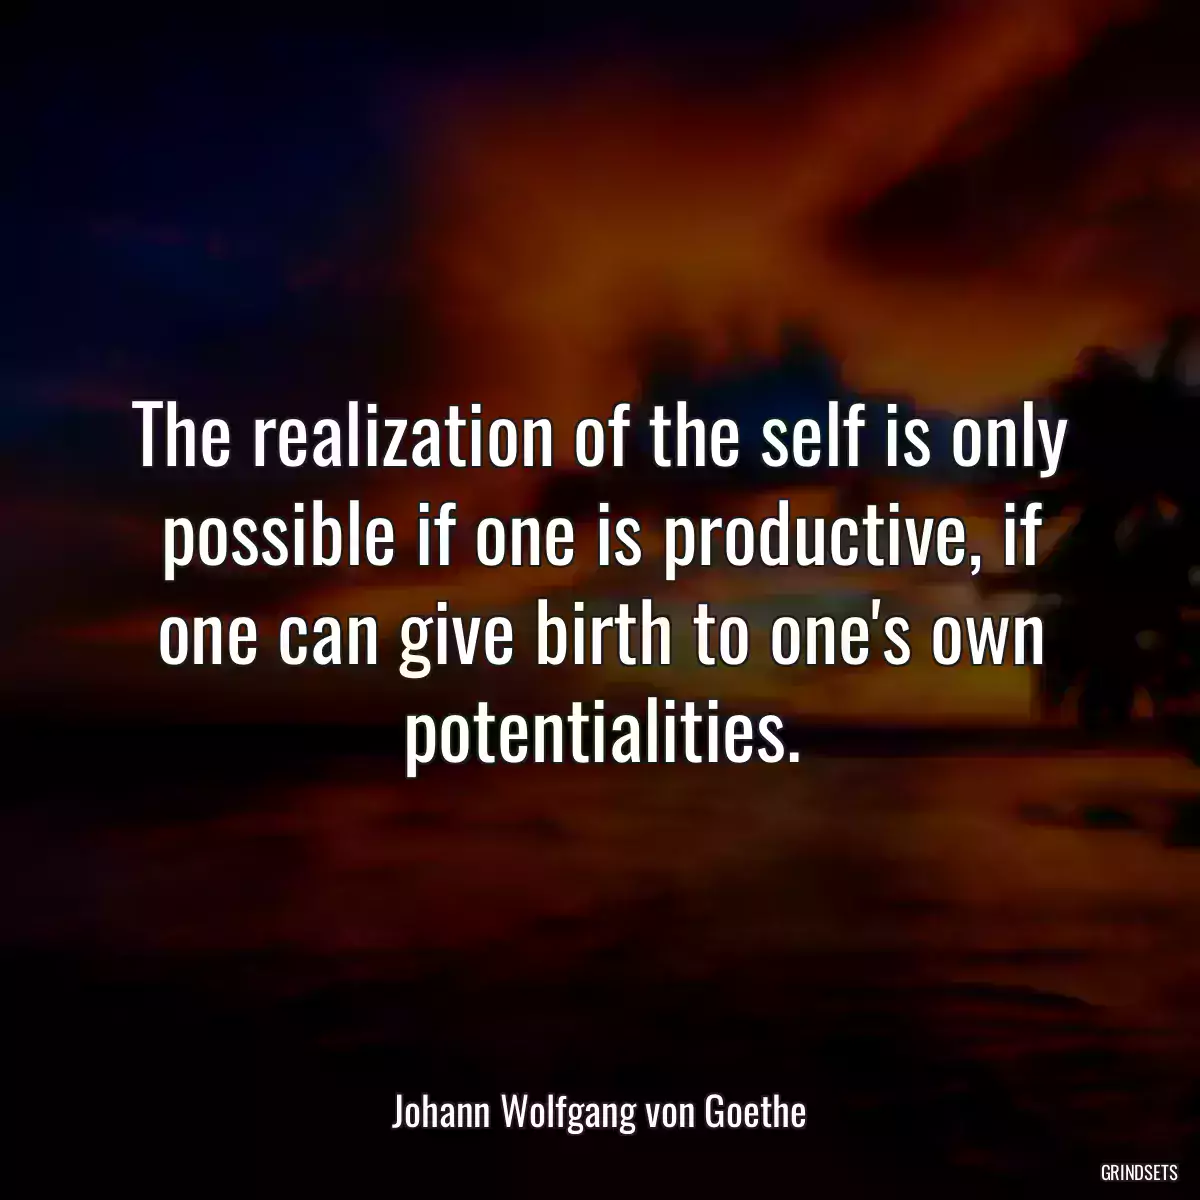 The realization of the self is only possible if one is productive, if one can give birth to one\'s own potentialities.